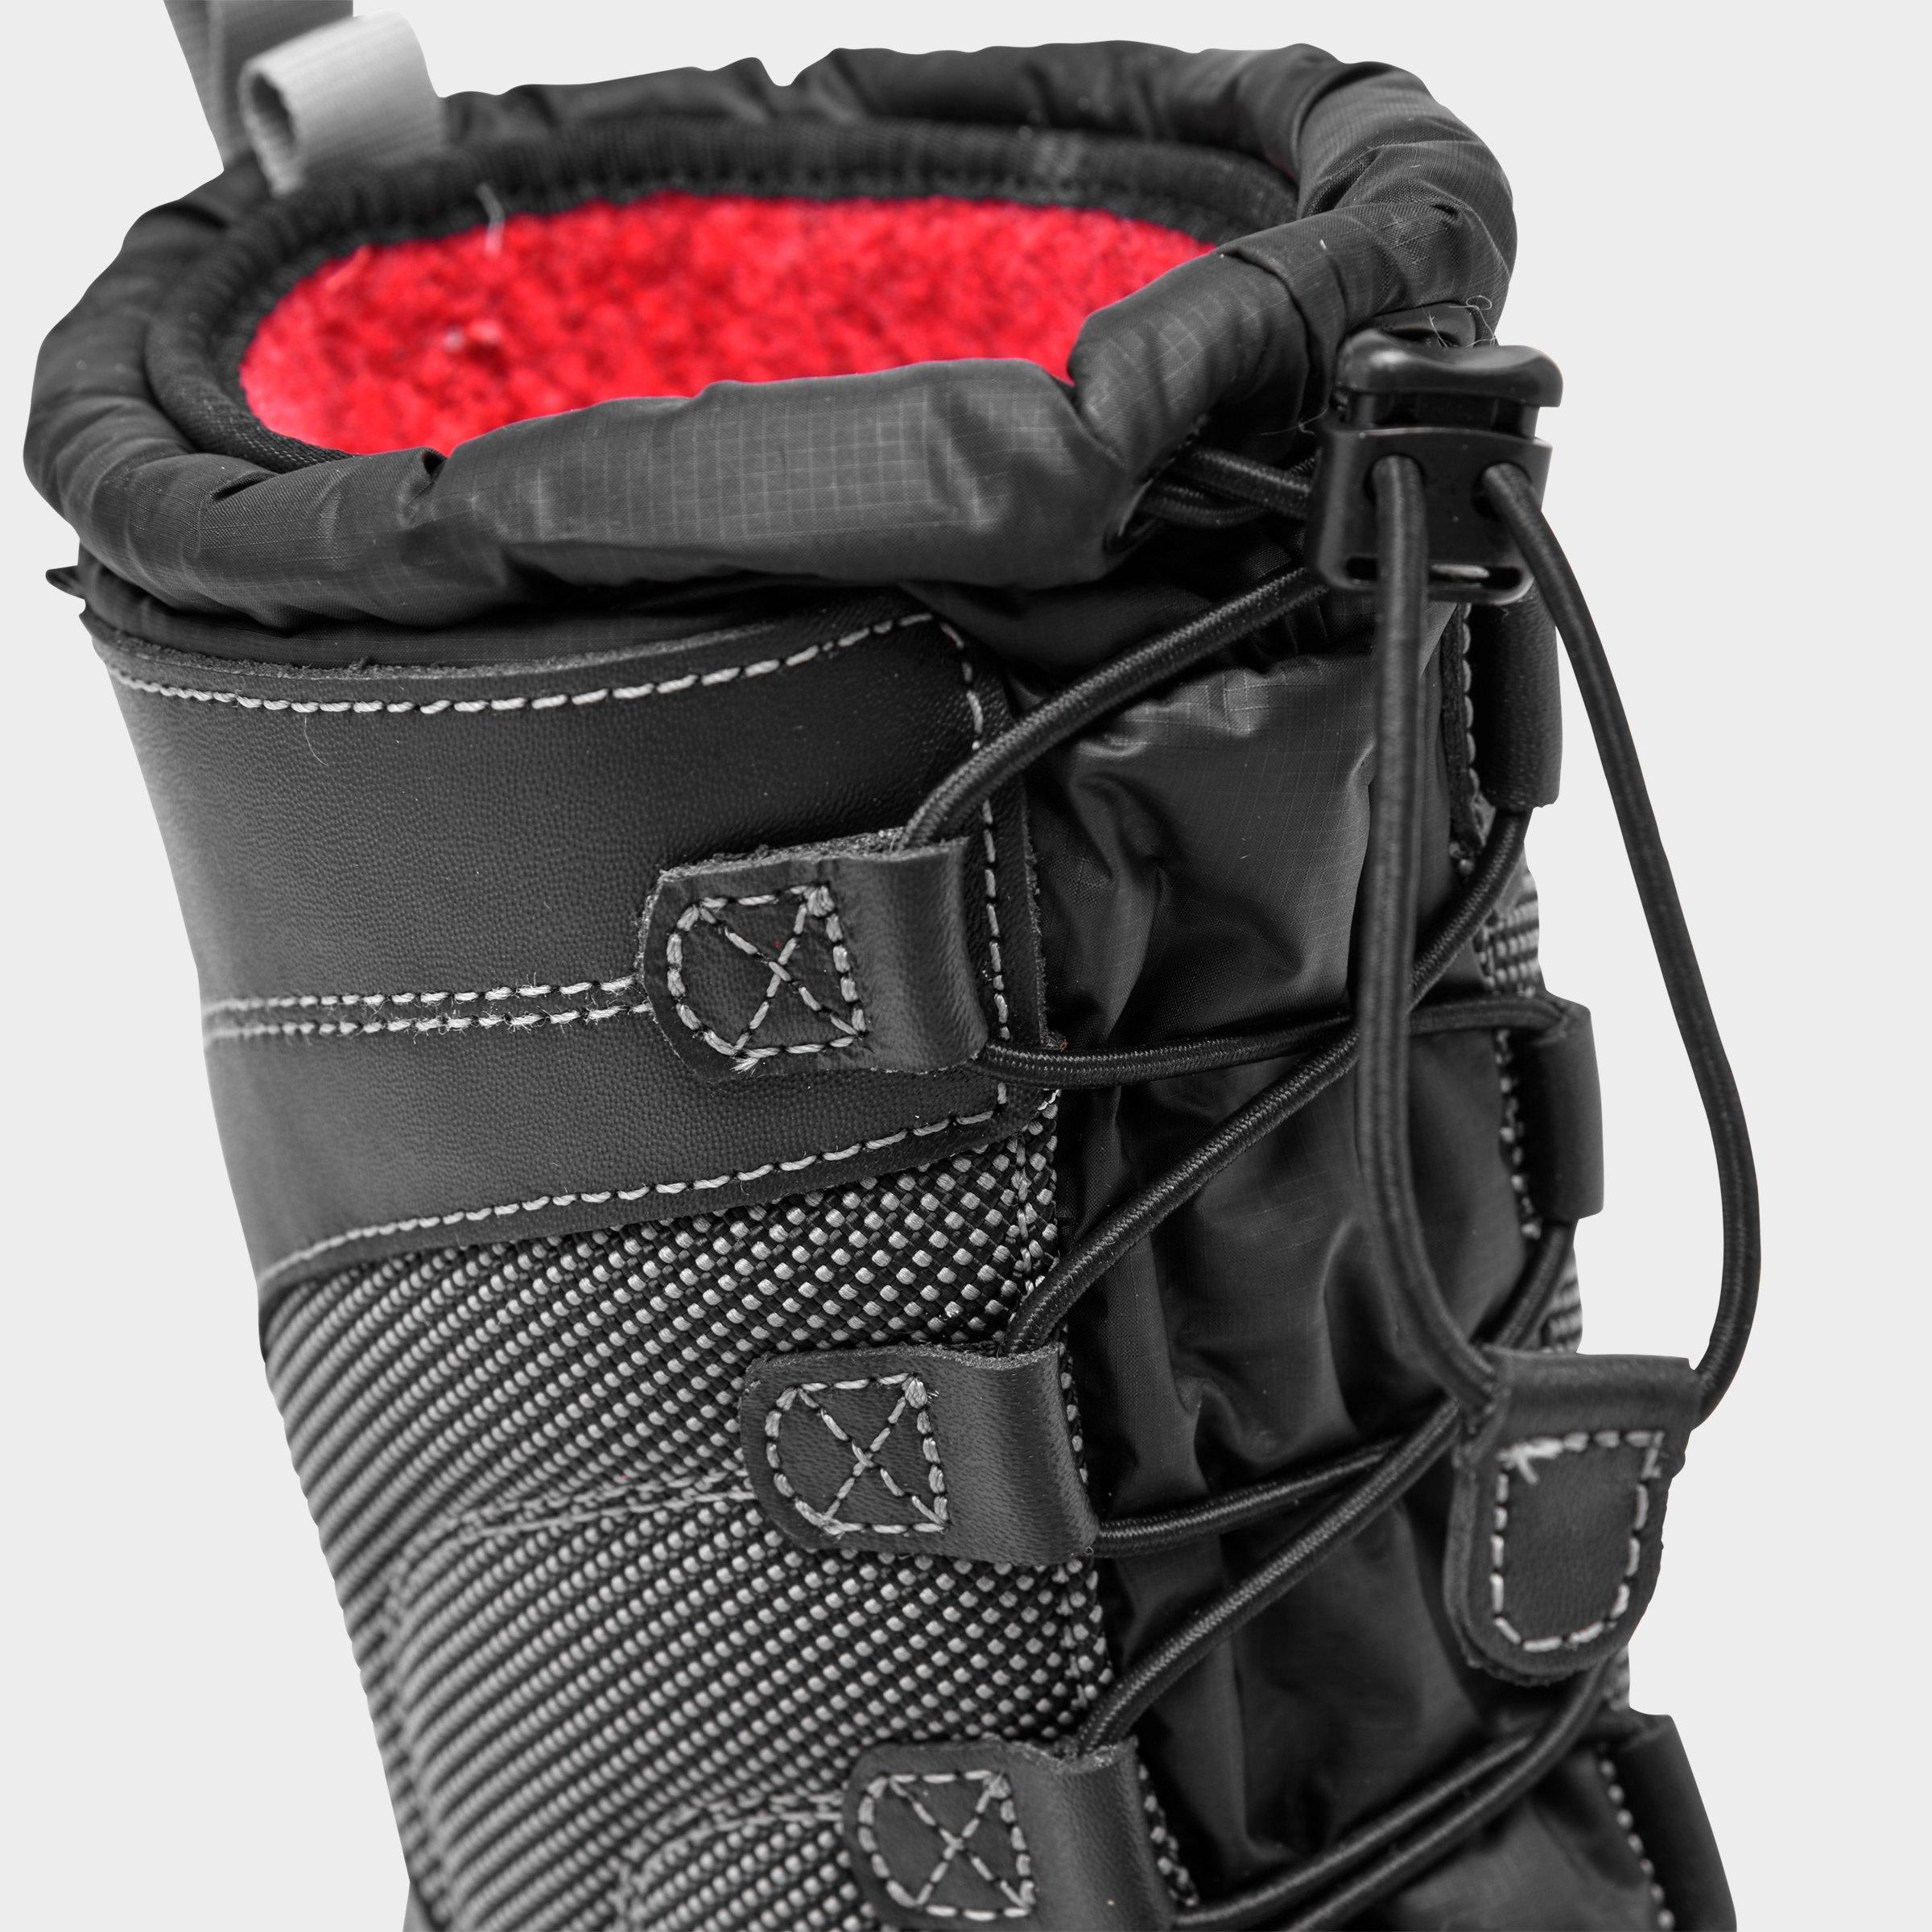 north face boys boots